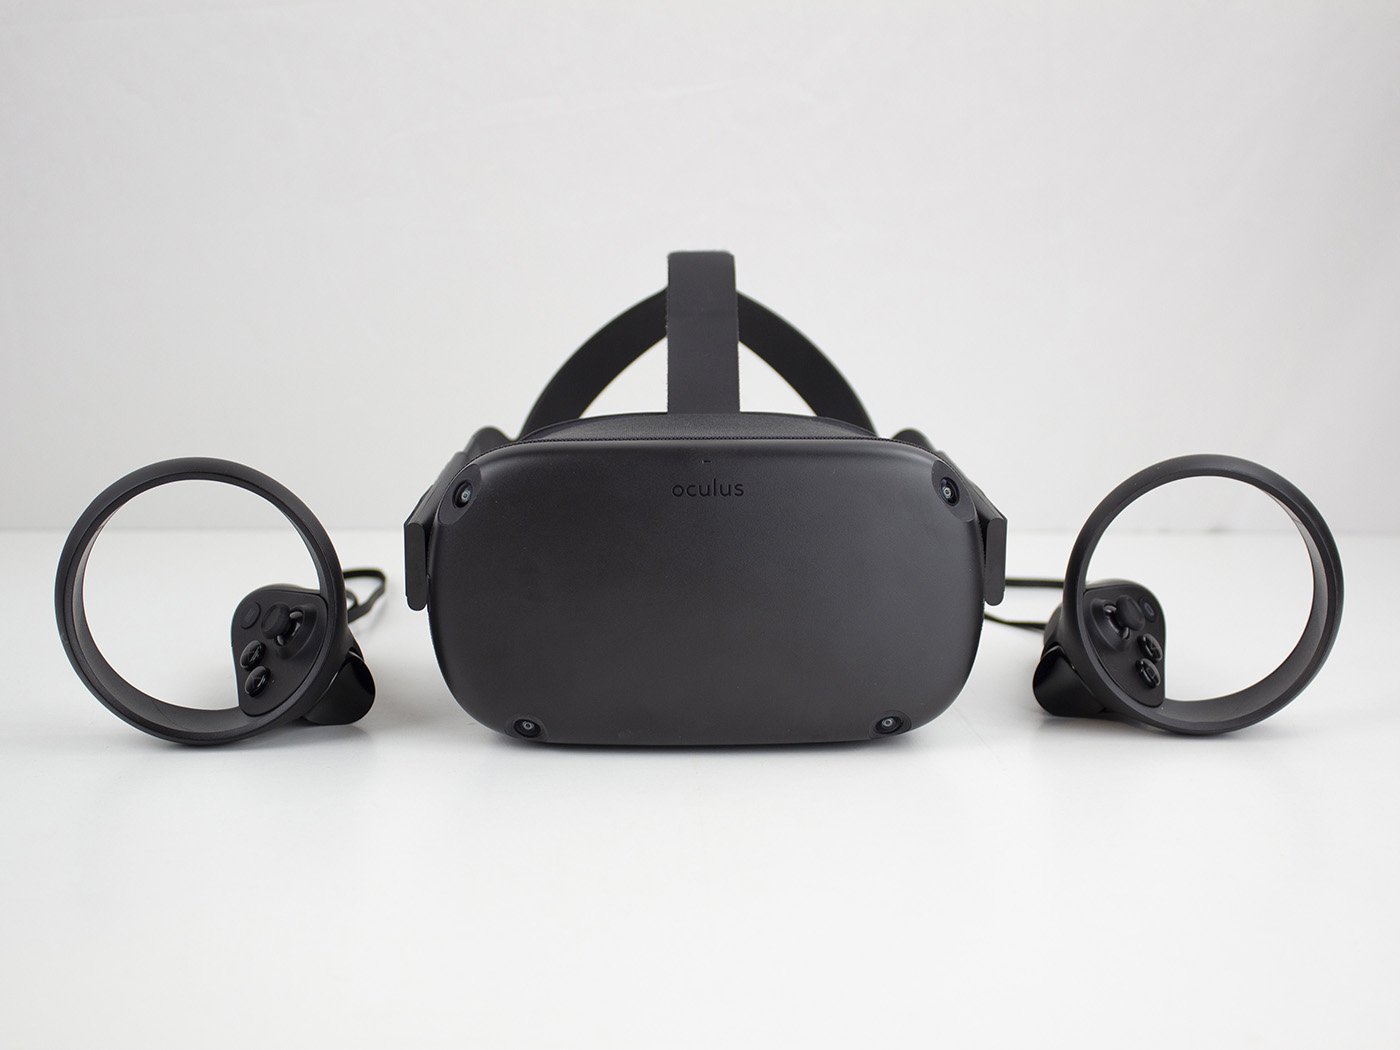 Nearly half of all VR headsets sold in 2019 was an Oculus Quest ...